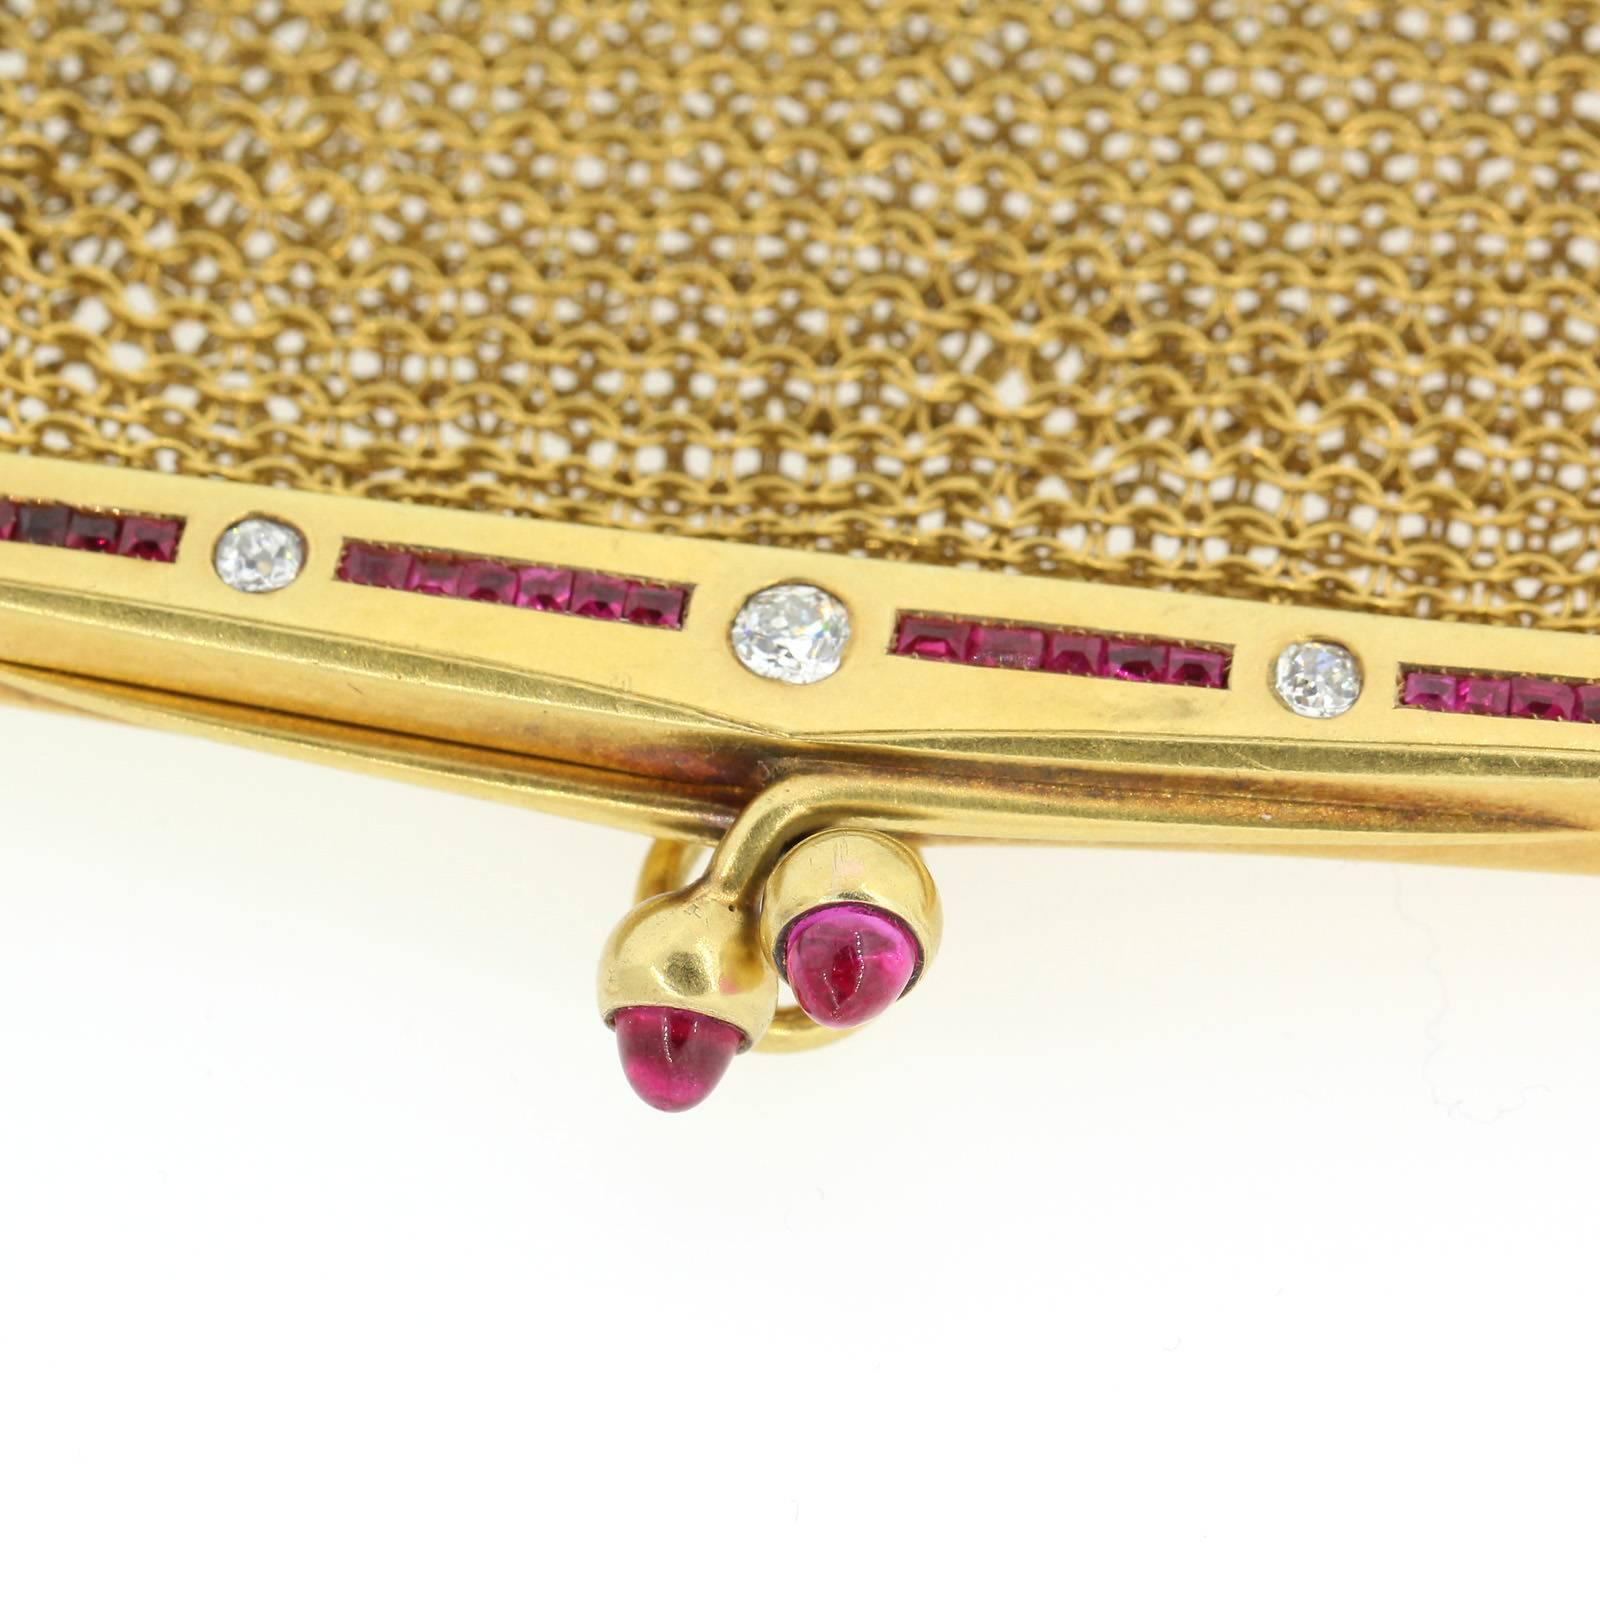 An exquisite English 18KT yellow mesh coin purse from circa 1900.  The frame is accented with a line of five Old European Cut Diamonds and calibrated synthetic Rubies.  The pendant purse is suspended from a vintage 14KT yellow gold, thirty two inch